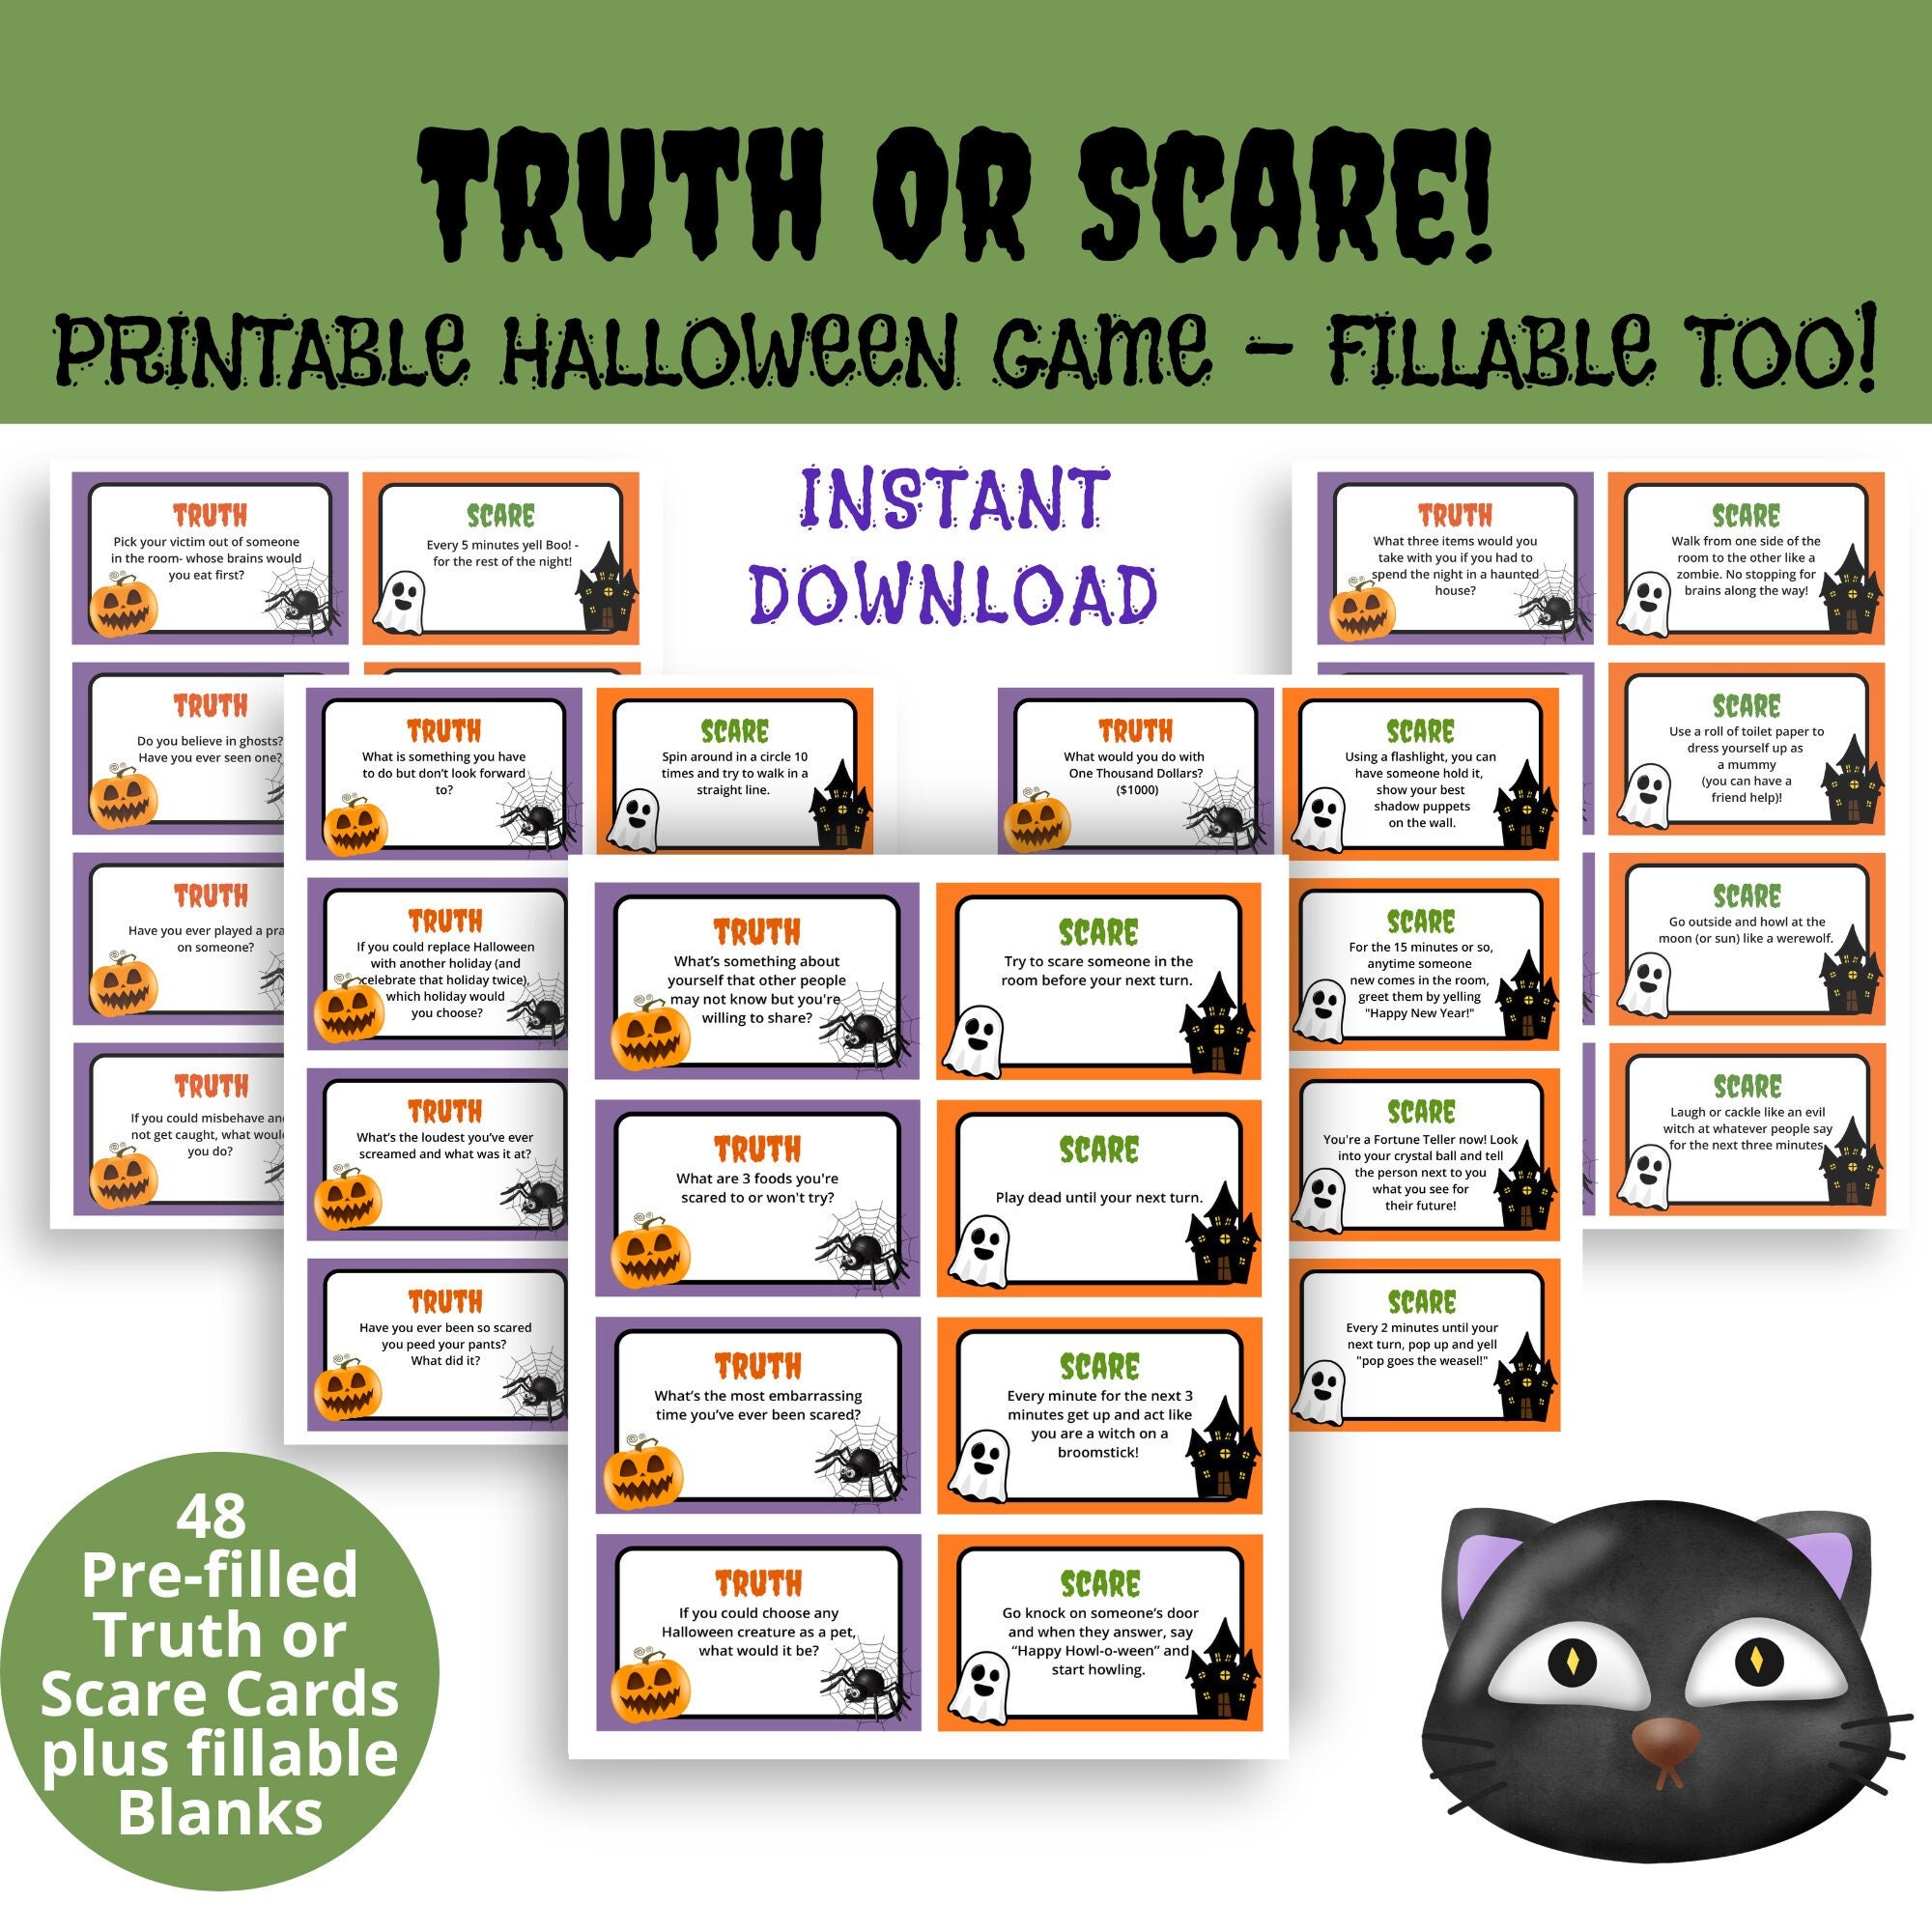 A Horror Free Alt Hallowe'en Lineup for Scaredy-Cats! - What She Said